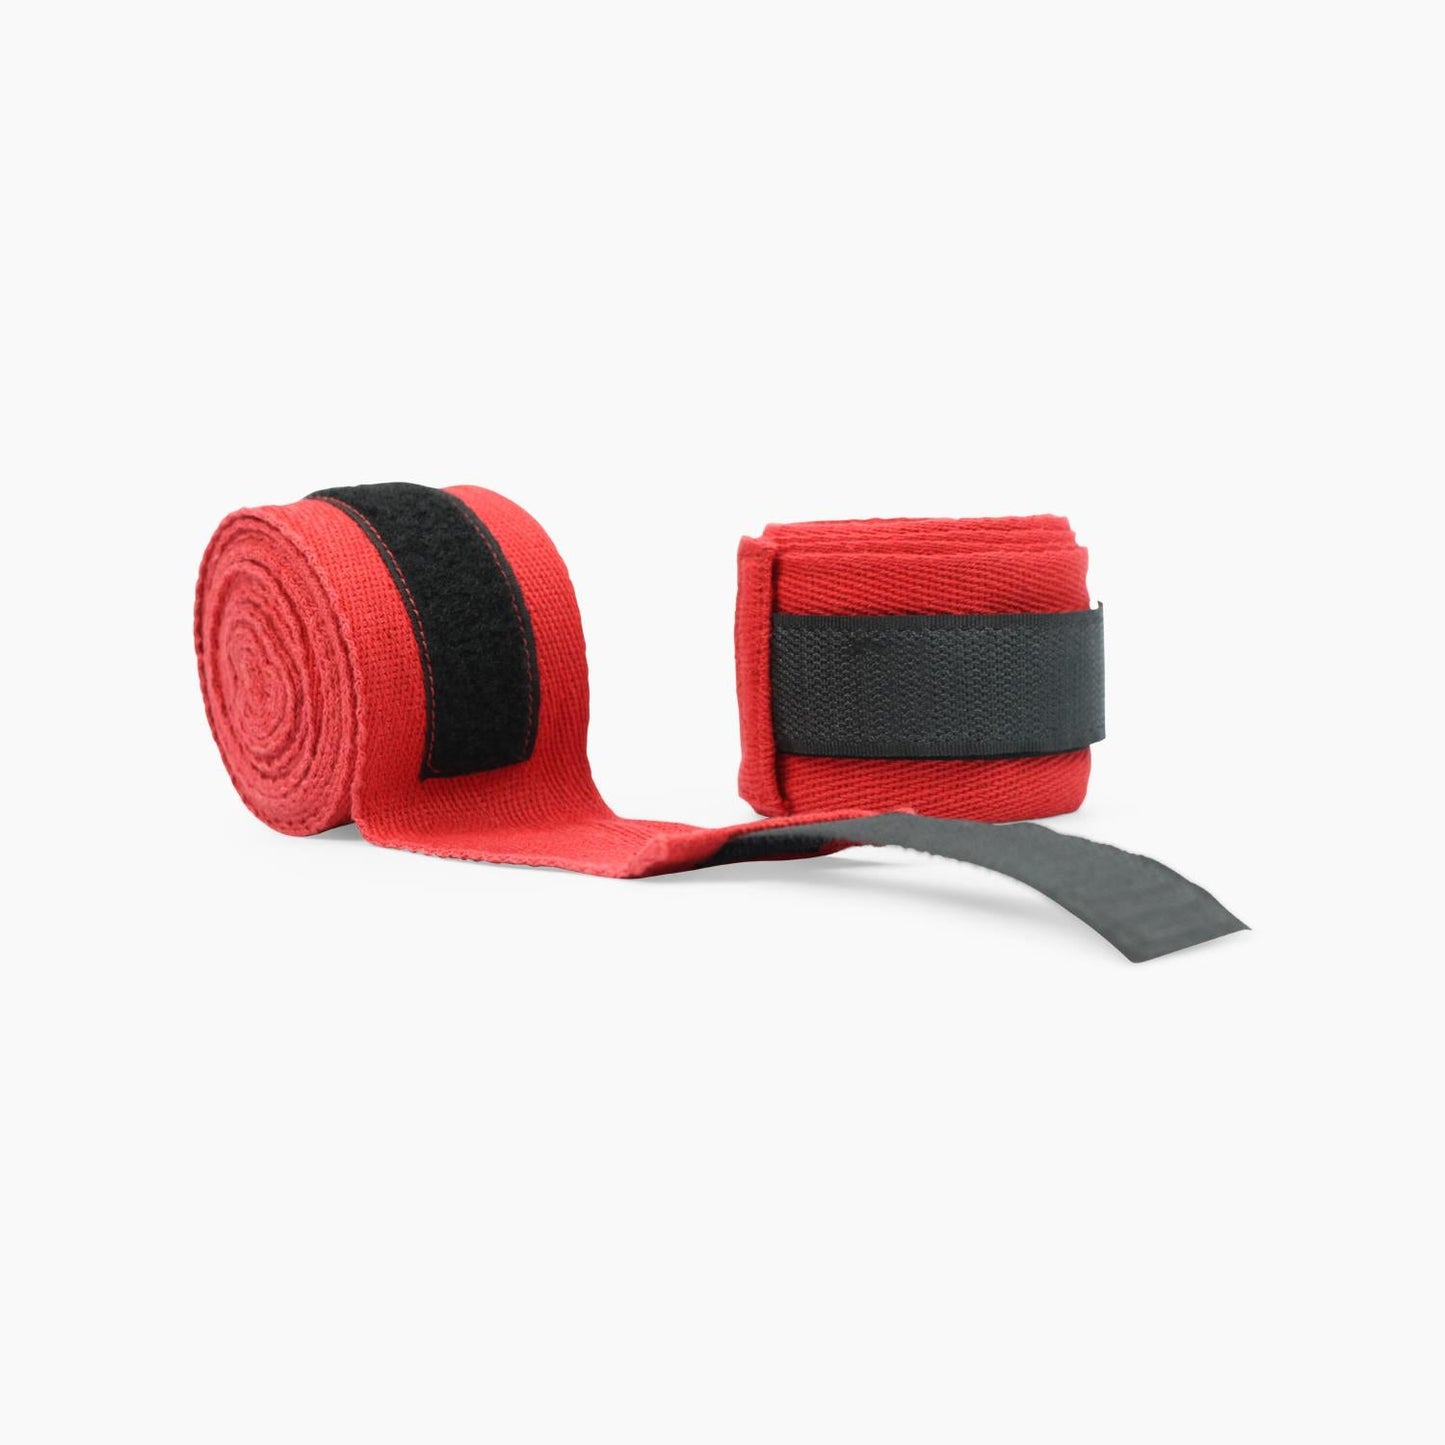 Buy Splay Hand Wraps-Hand Wraps-Splay (UK) Limited-Red-120 Inch-Splay UK Online